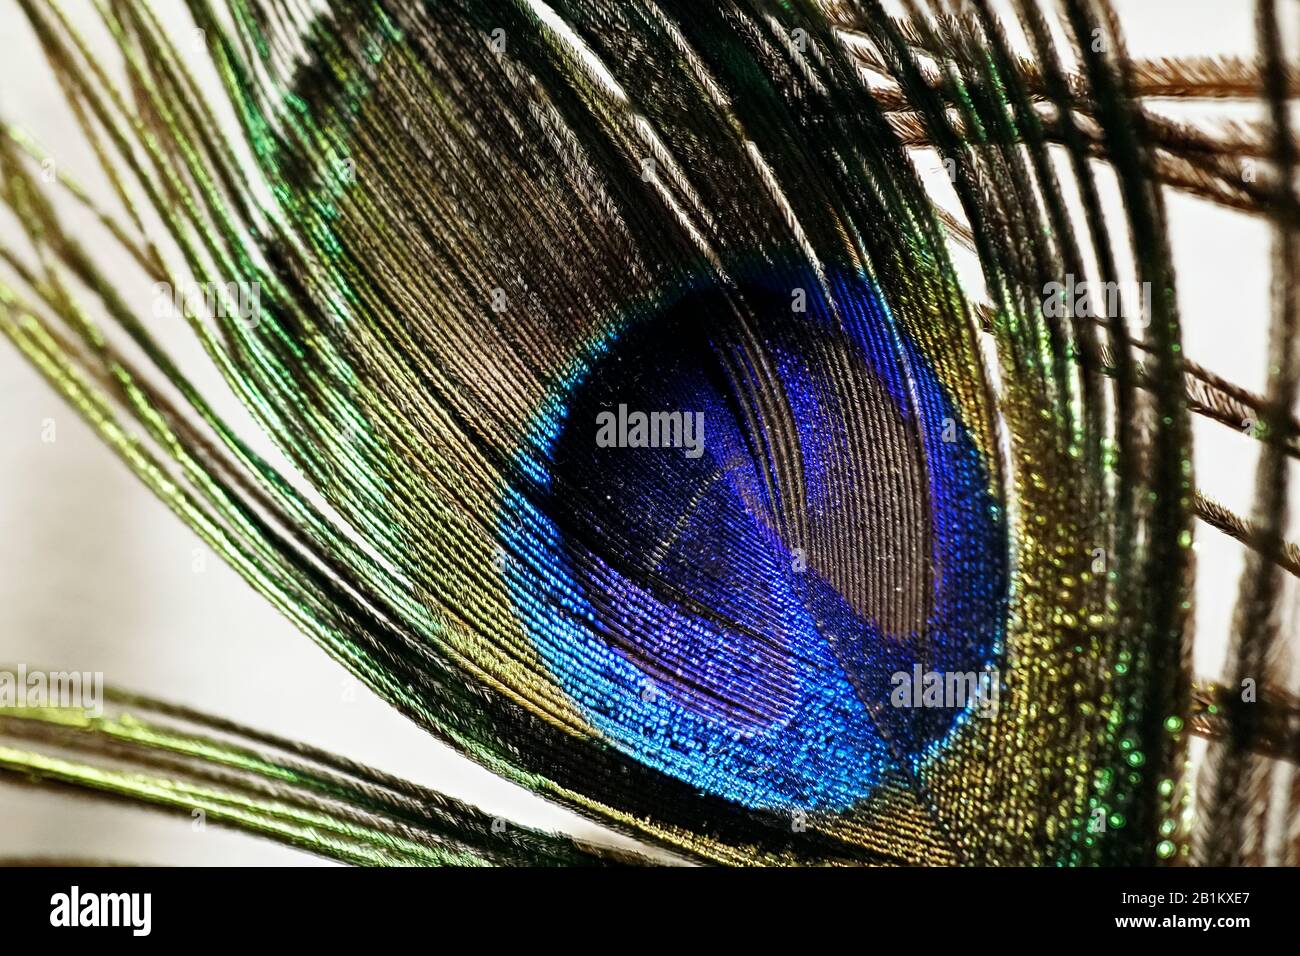 Detail close up of a real peacock feather eye Stock Photo